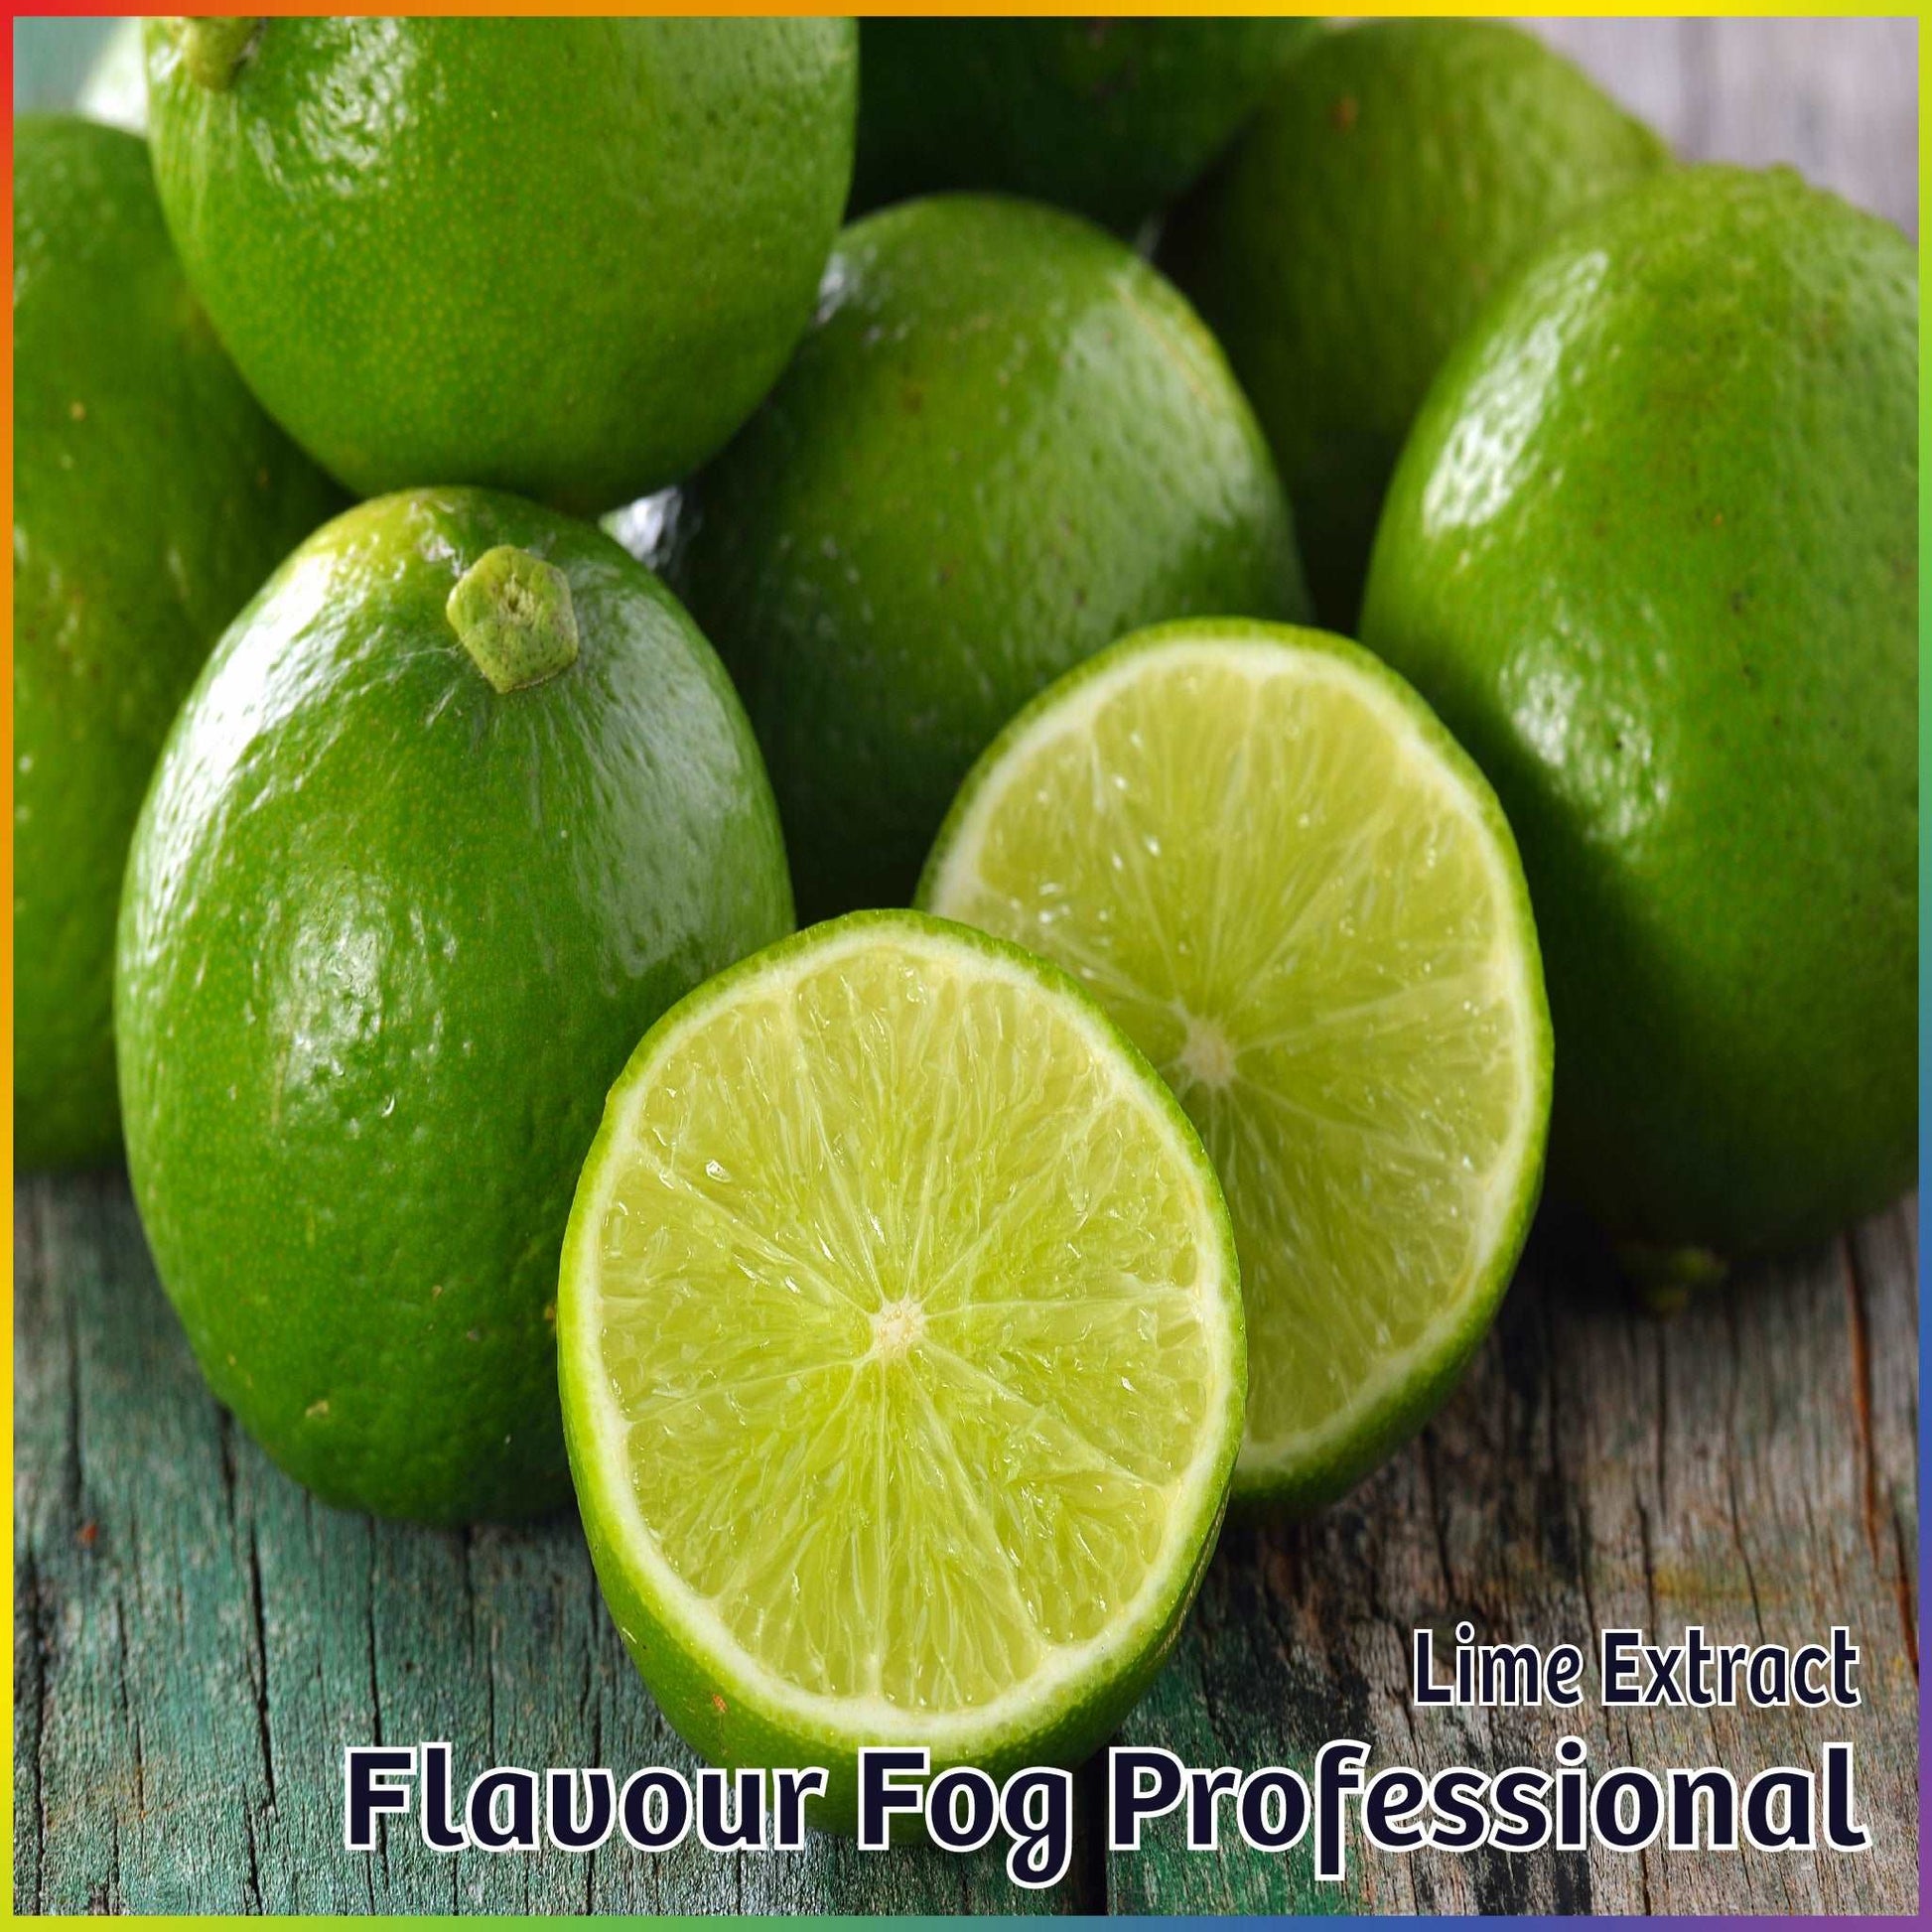 Lime Extract - FF Pro - Flavour Fog - Canada's flavour depot.